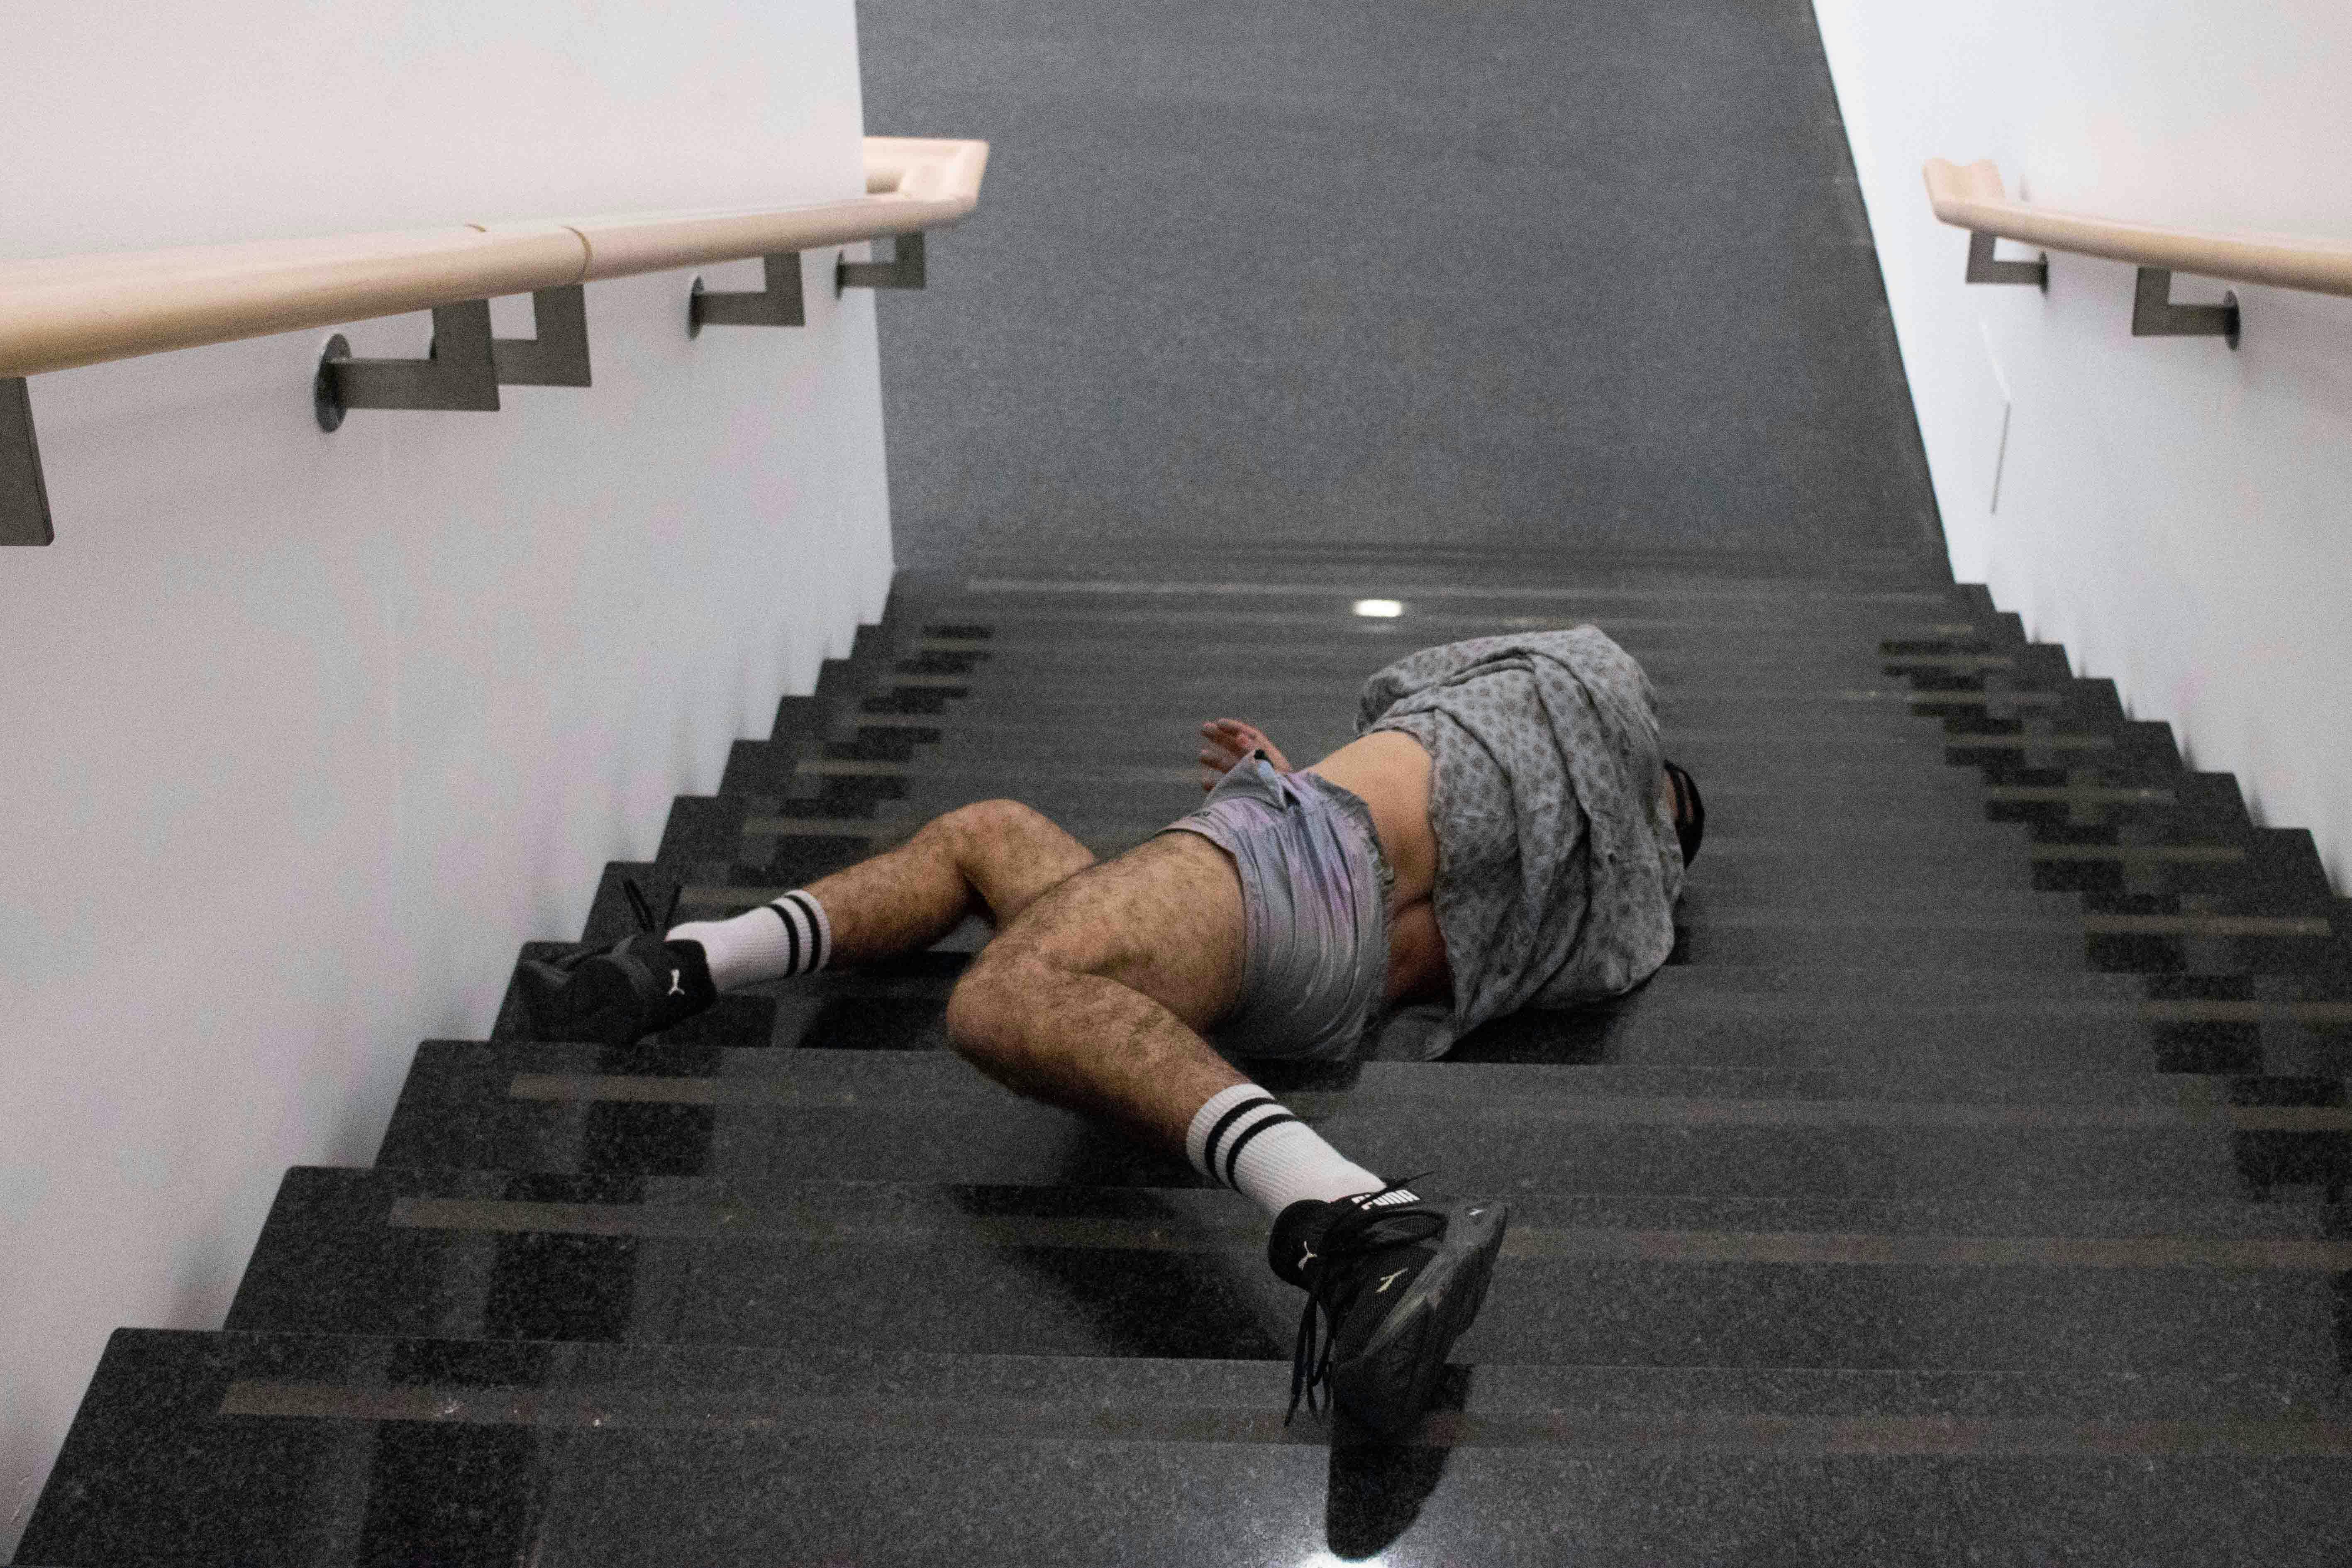 Daniele Ninarello is lying on a staircase in a disheveled position. The body is upside down, facing the base of the stairs.